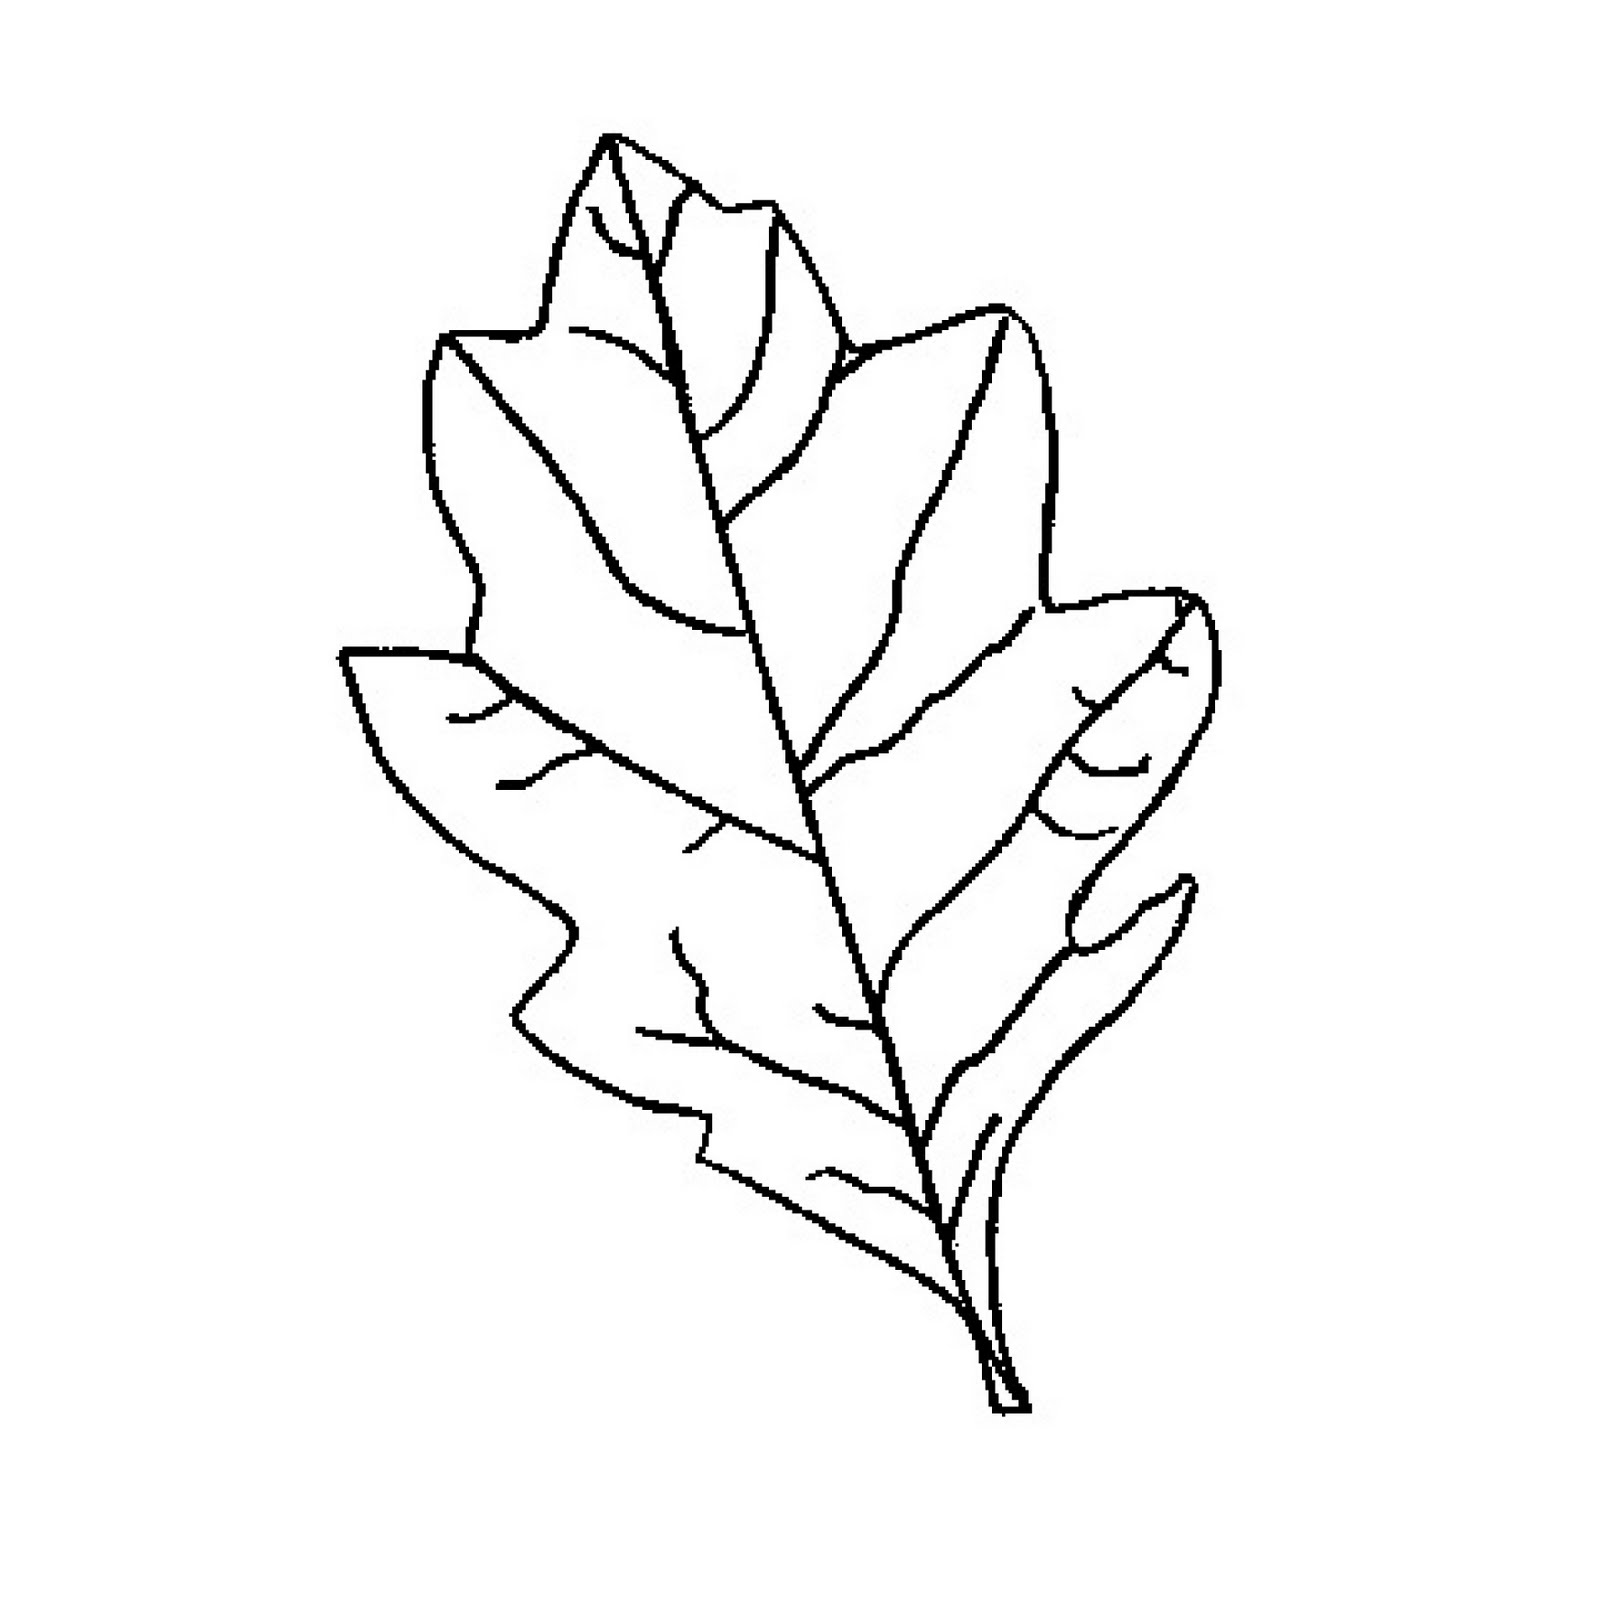 Picture Of An Oak Leaf - Clipart library